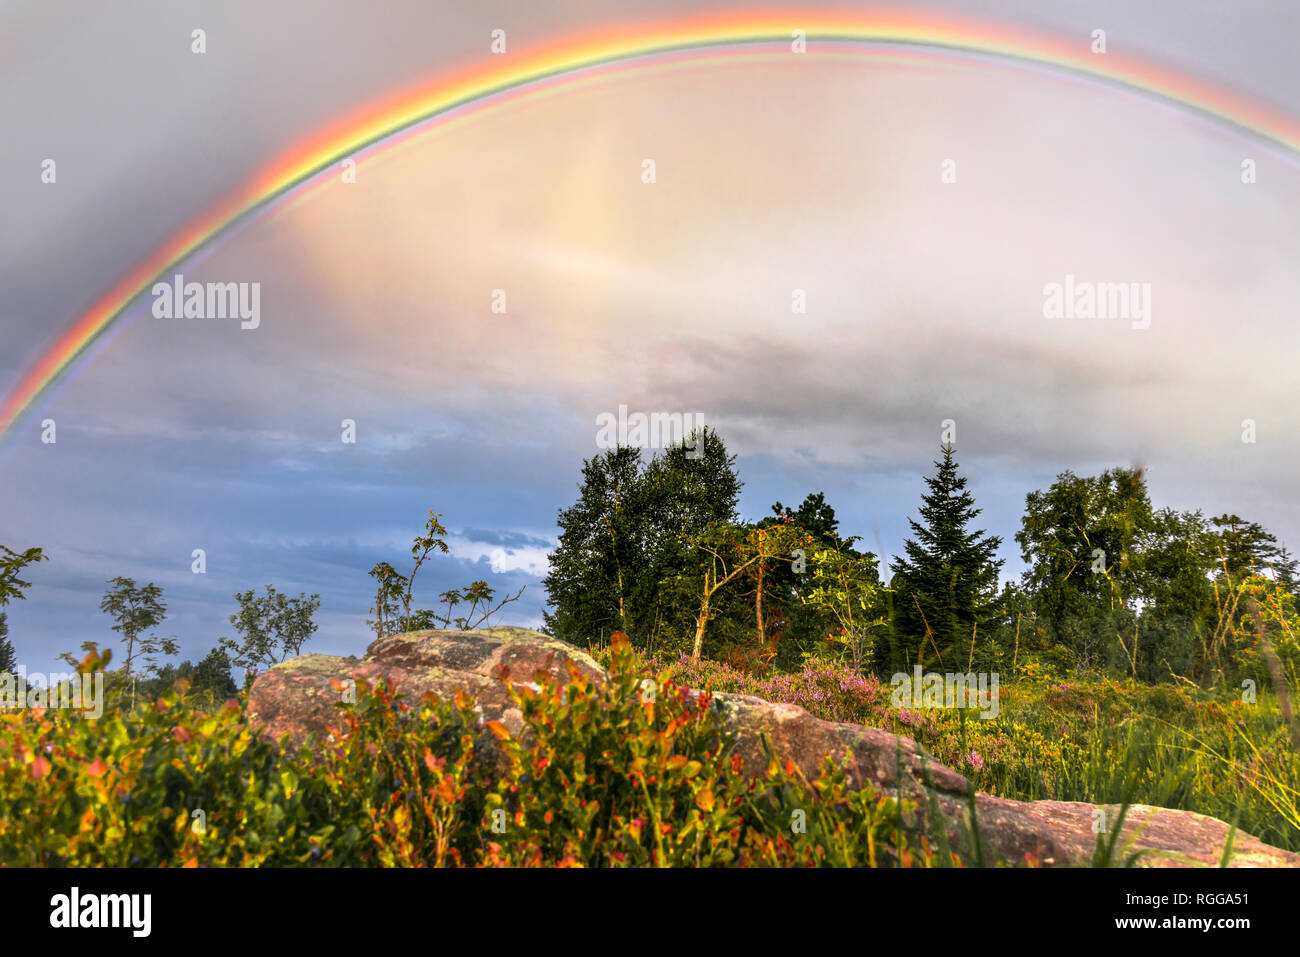 rainbow over the landscape of the Black Forest, Germany, typical bunter sandstone and bilberry bushes in foreground, mountain Schliffkopf Stock Photo